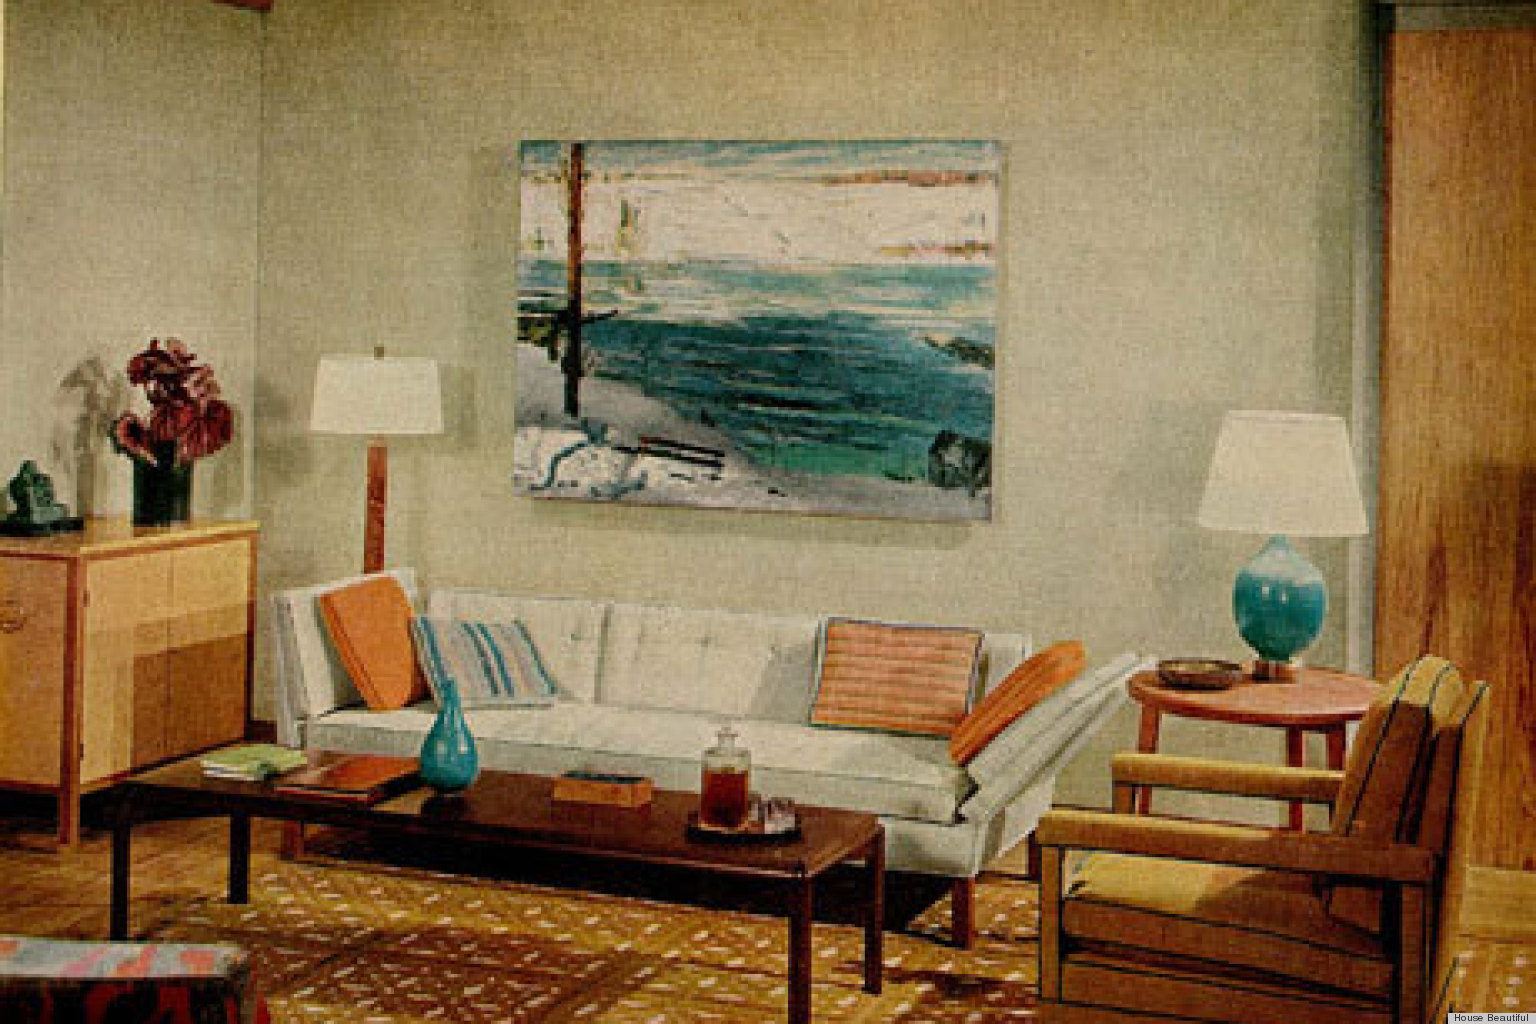 1960s interiors interior living 1960 furniture mad american tones brown trends cool inspired painting modern 60s 60 homes apartment rooms